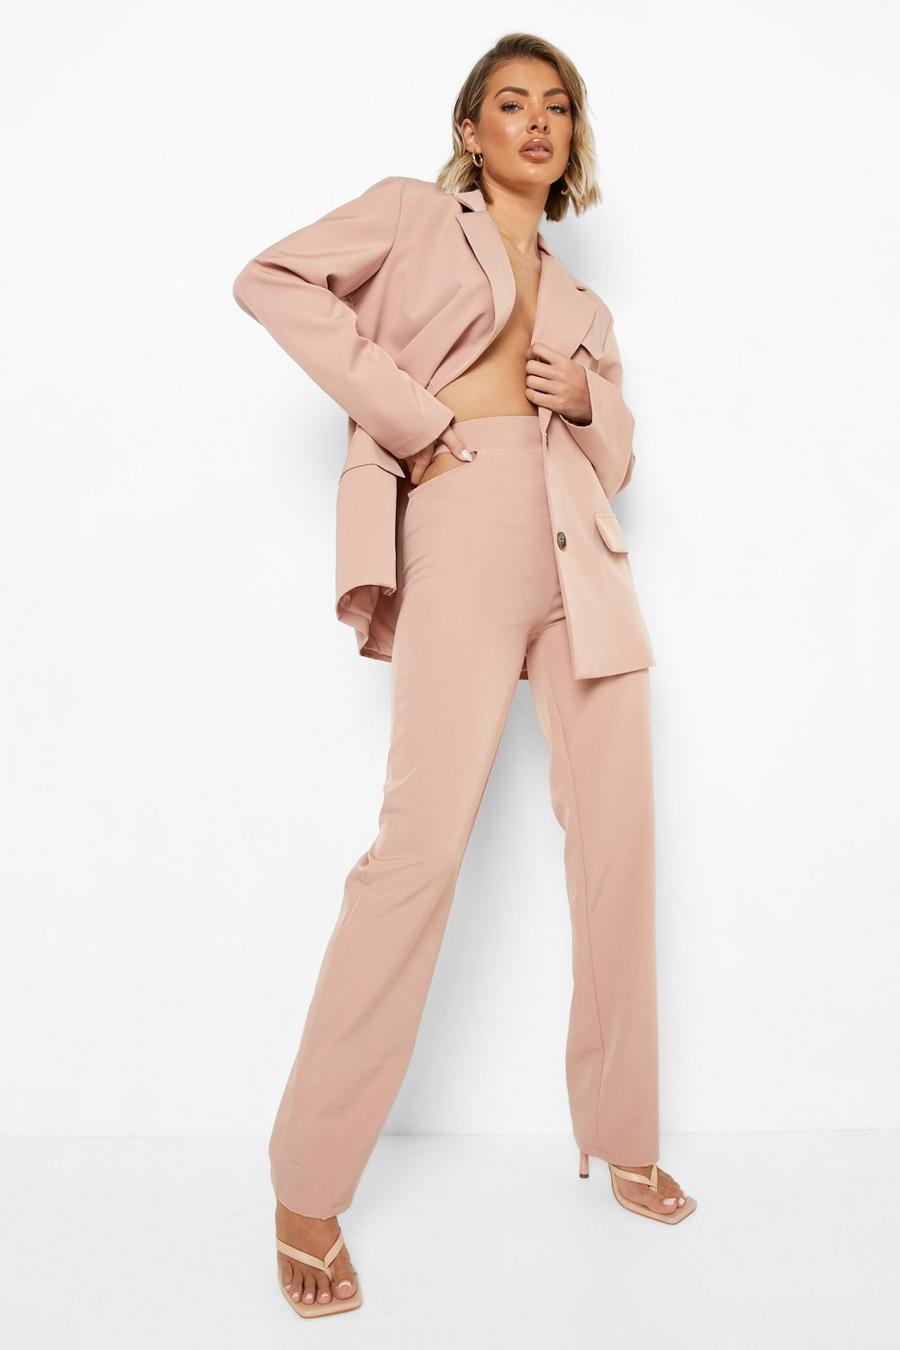 Nude Cut Out Side Tailored Trousers 